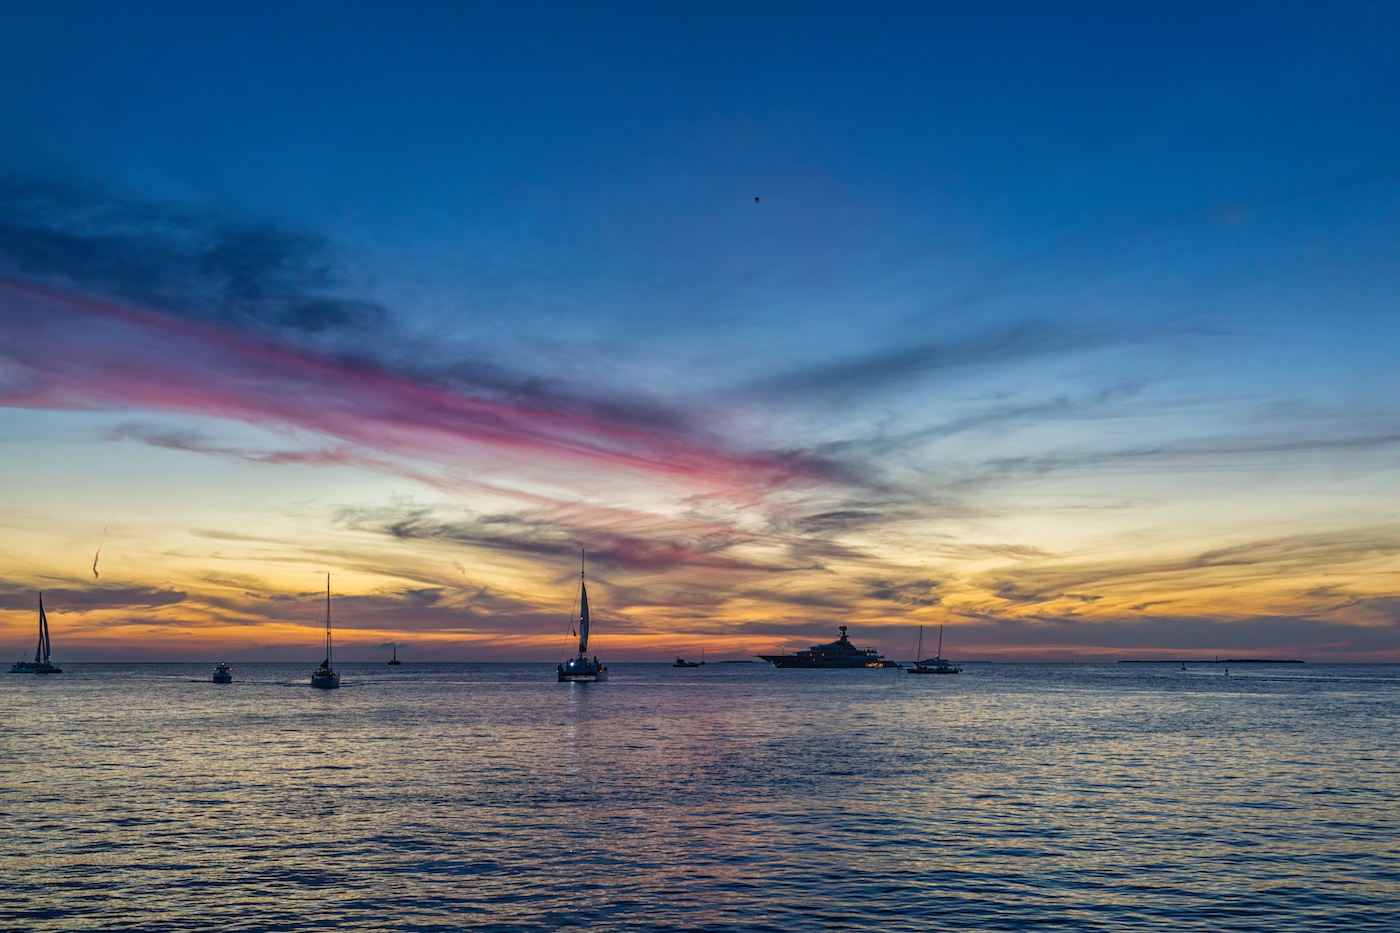 Silhouettes of boats and yachts at colorful sunset twilight blue hour with landscape view on blue cloudy sky with clouds by Mallory Square of Key West, Florida